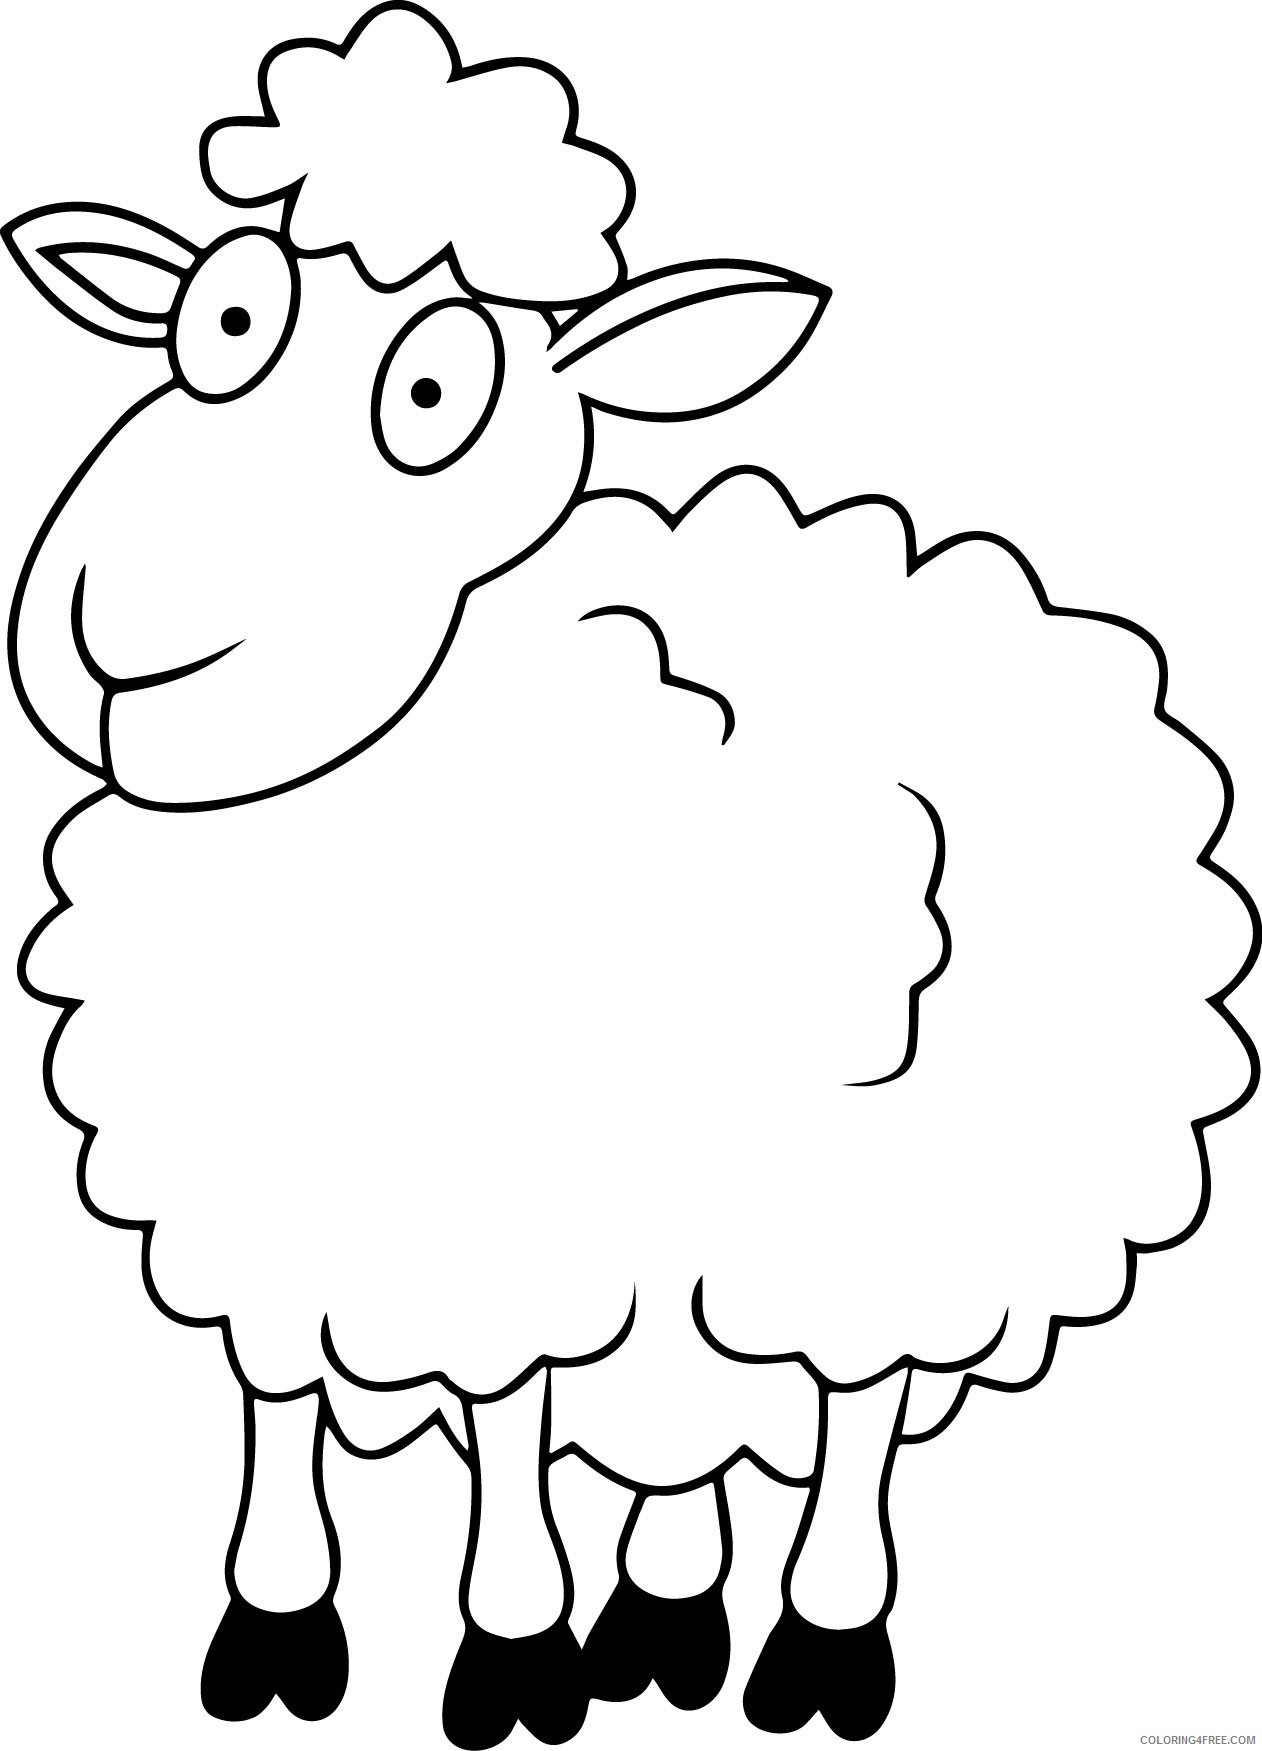 sheep coloring pages for kids Coloring4free